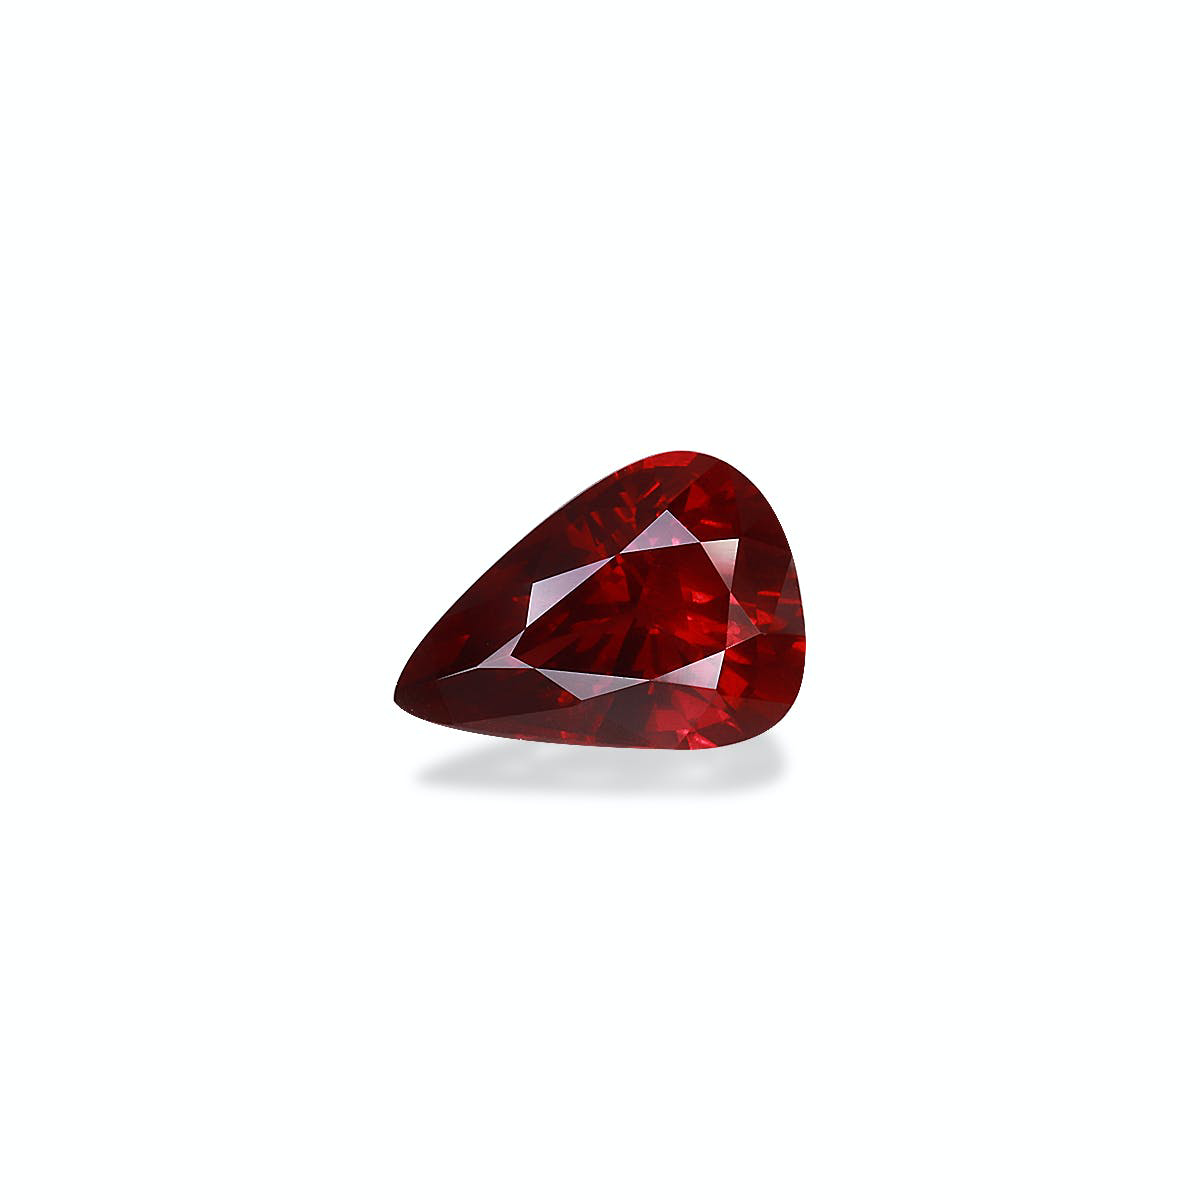 Picture of Pigeons Blood Heated Mozambique Ruby 1.92ct - 9x7mm (SLCR-03)